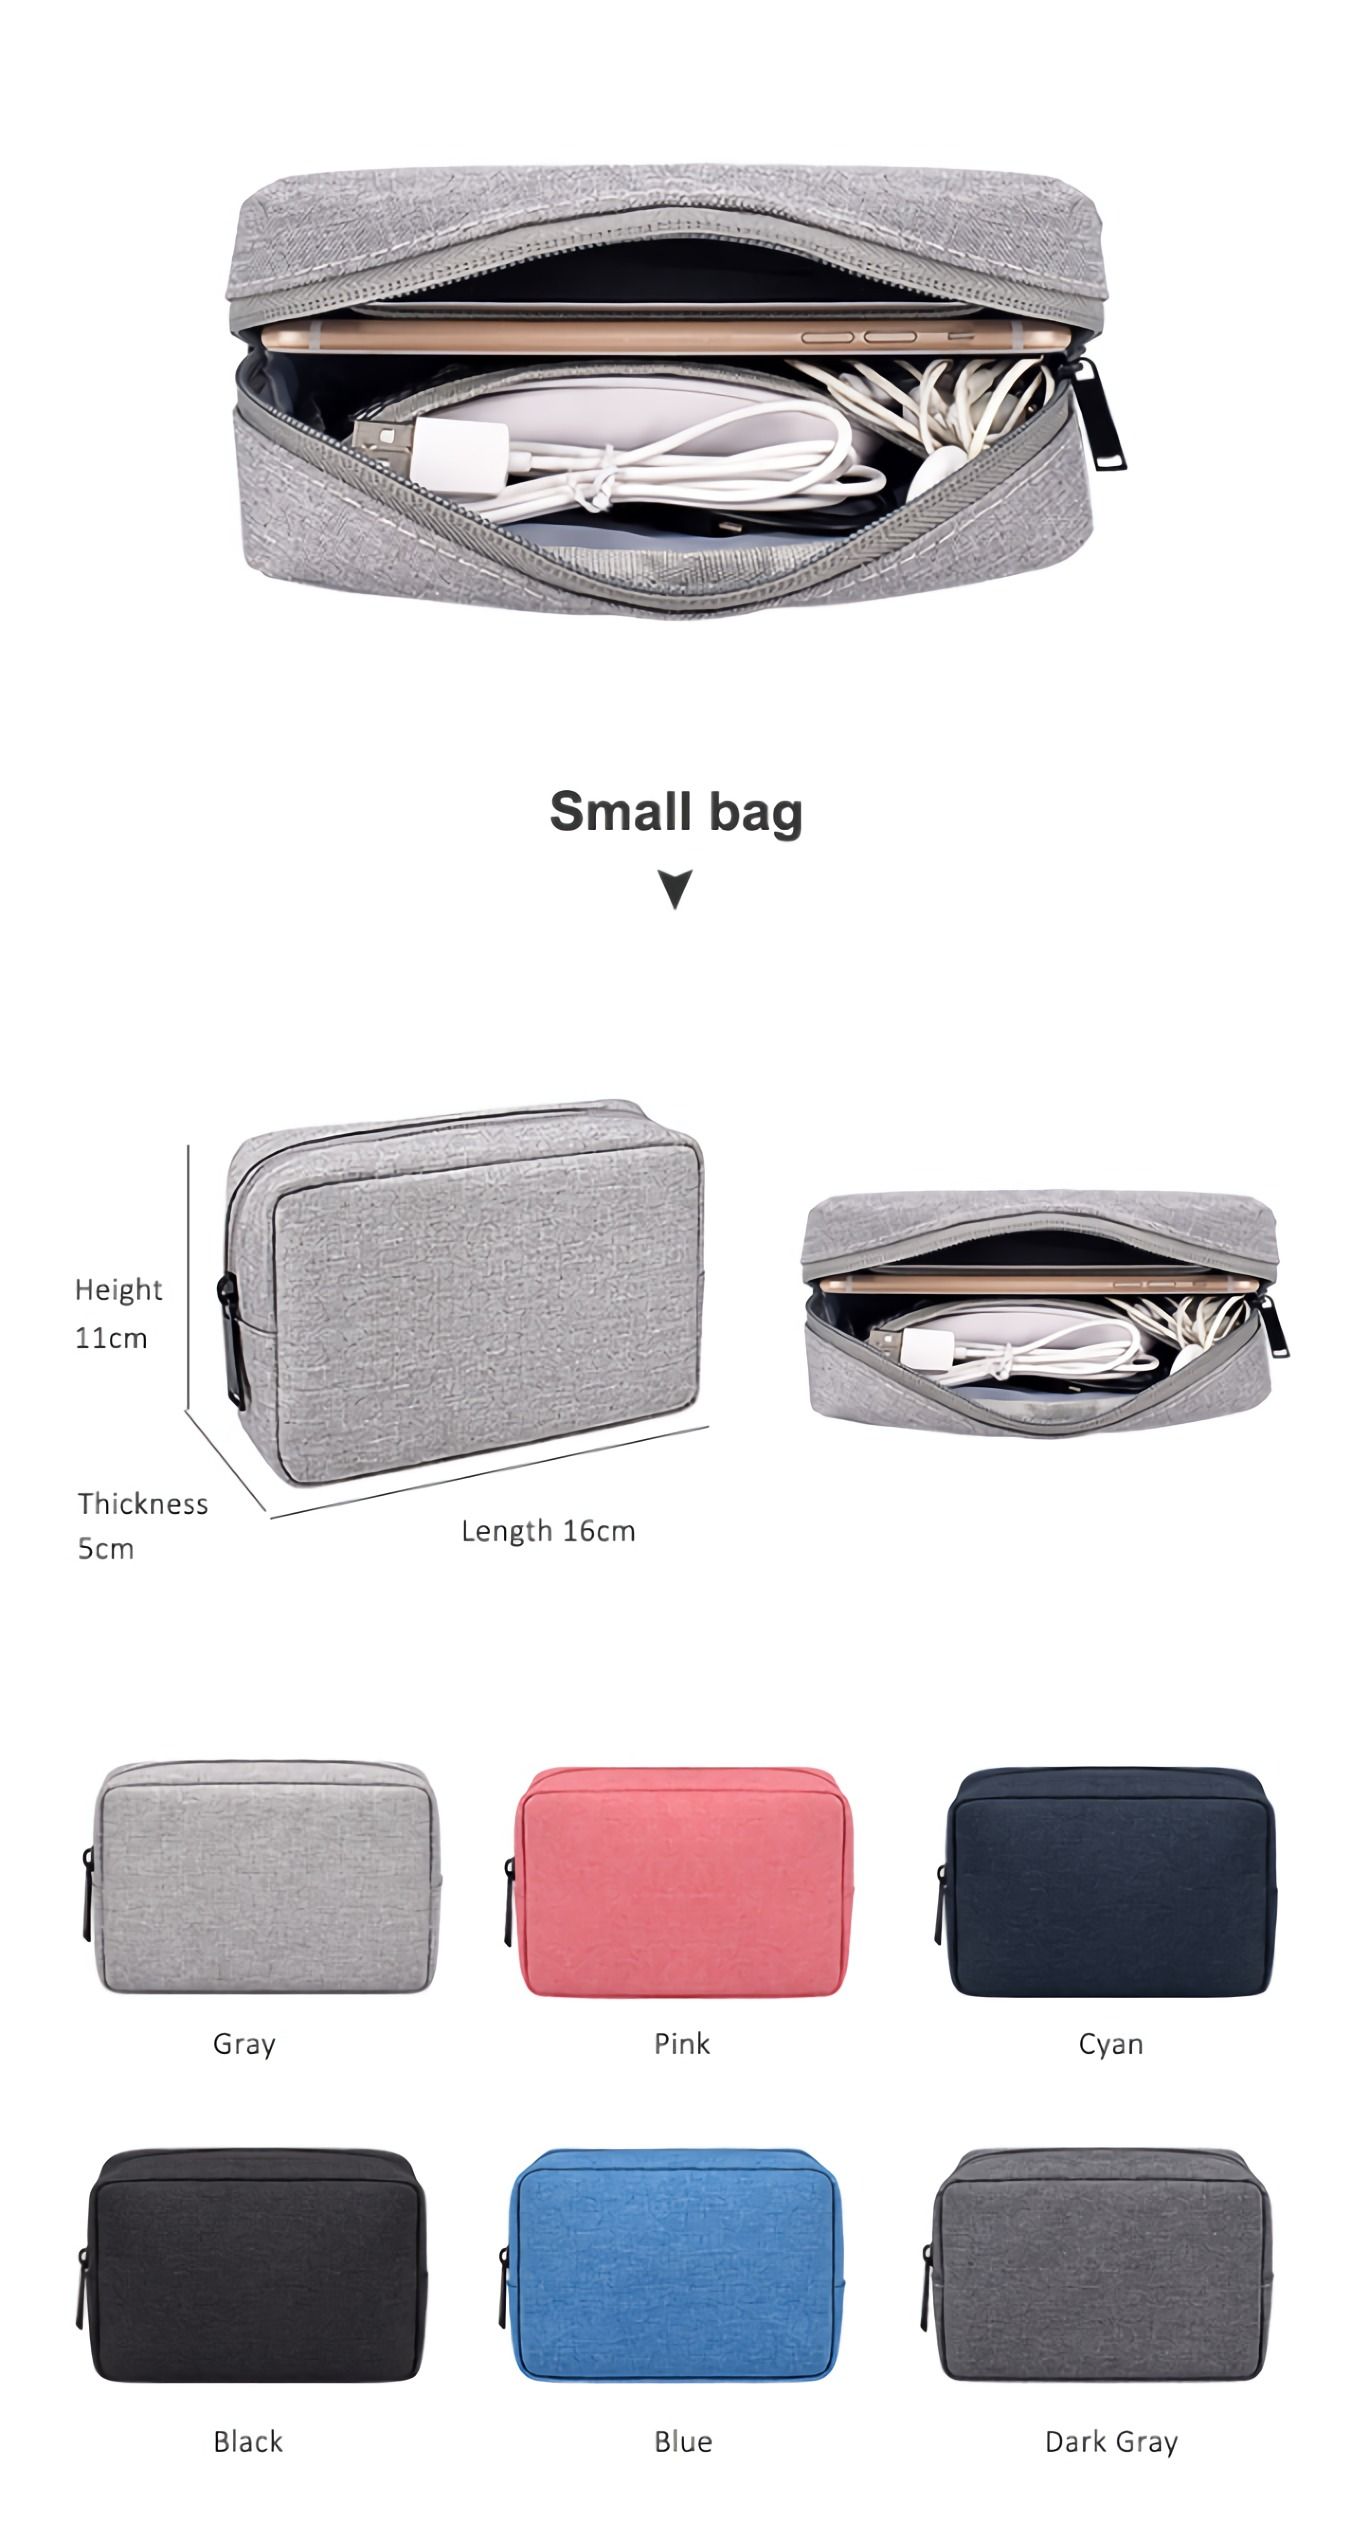 Laptop-Power-Adapter-Accessories-Storage-Bag-Travel-Cable-Organizer-Bag-1657679